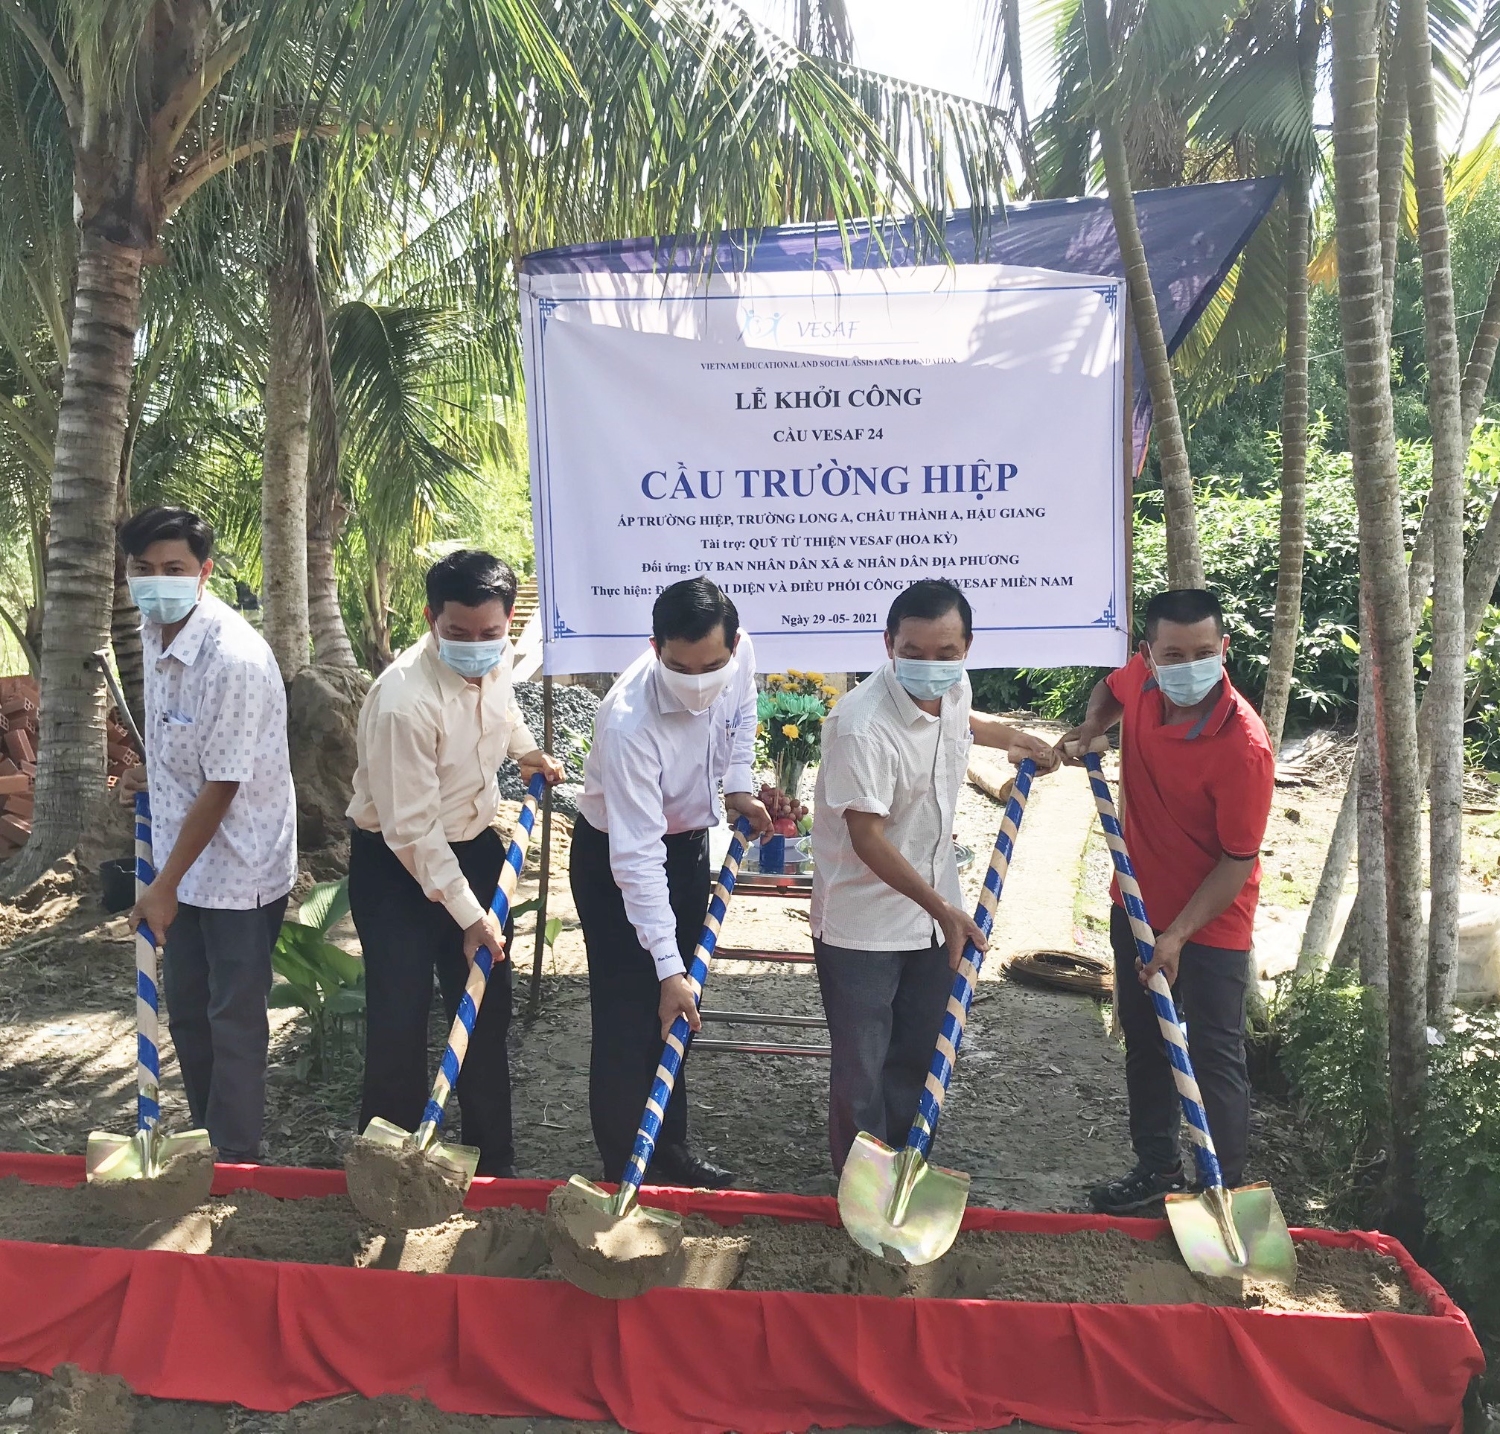 Leader of Hau Giang province the Union of Friendship Organizations and Vietnam Education and Social Assistance Foundation - VESAF and NFP (USA) performed the groundbreaking ceremony of Truong Hiep bridge.